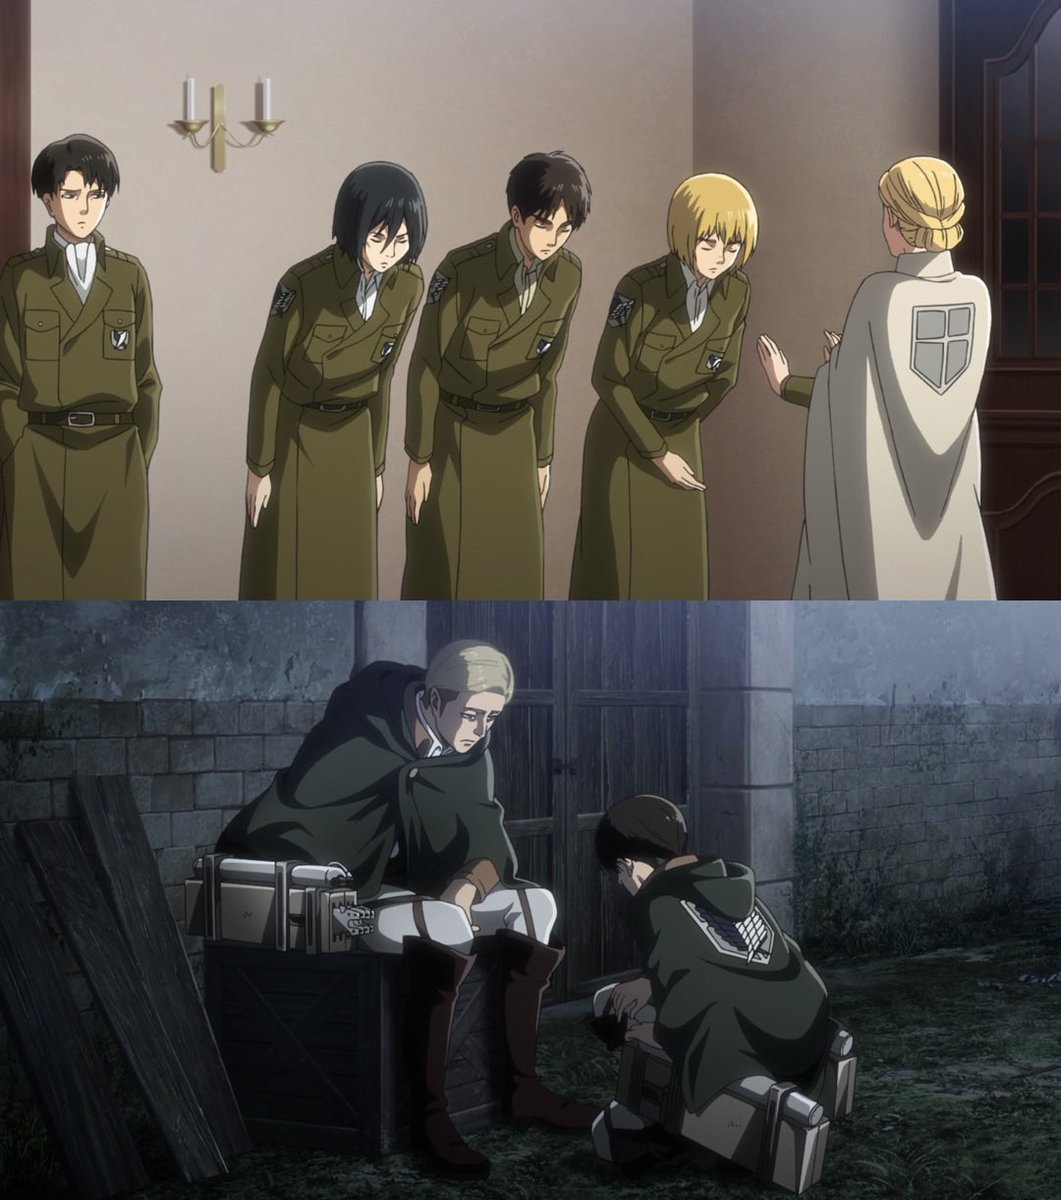 -Levi with the Queen -Levi with Erwin